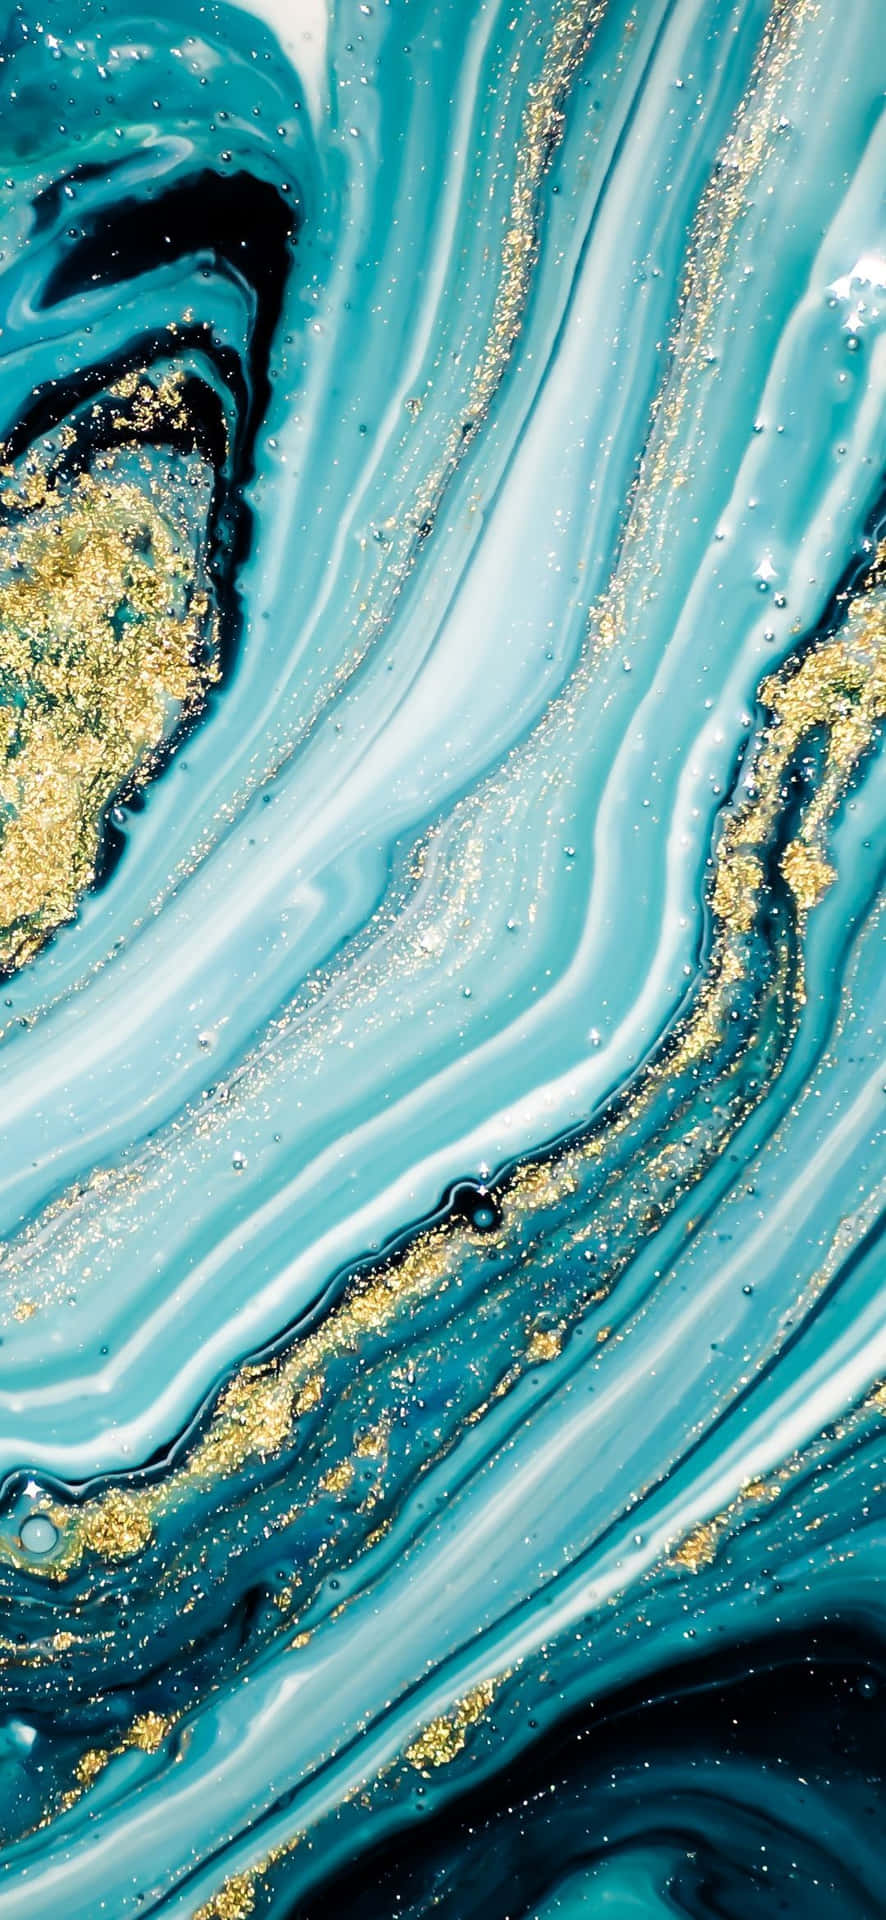 Get the sleek and stylish Marble Phone Wallpaper